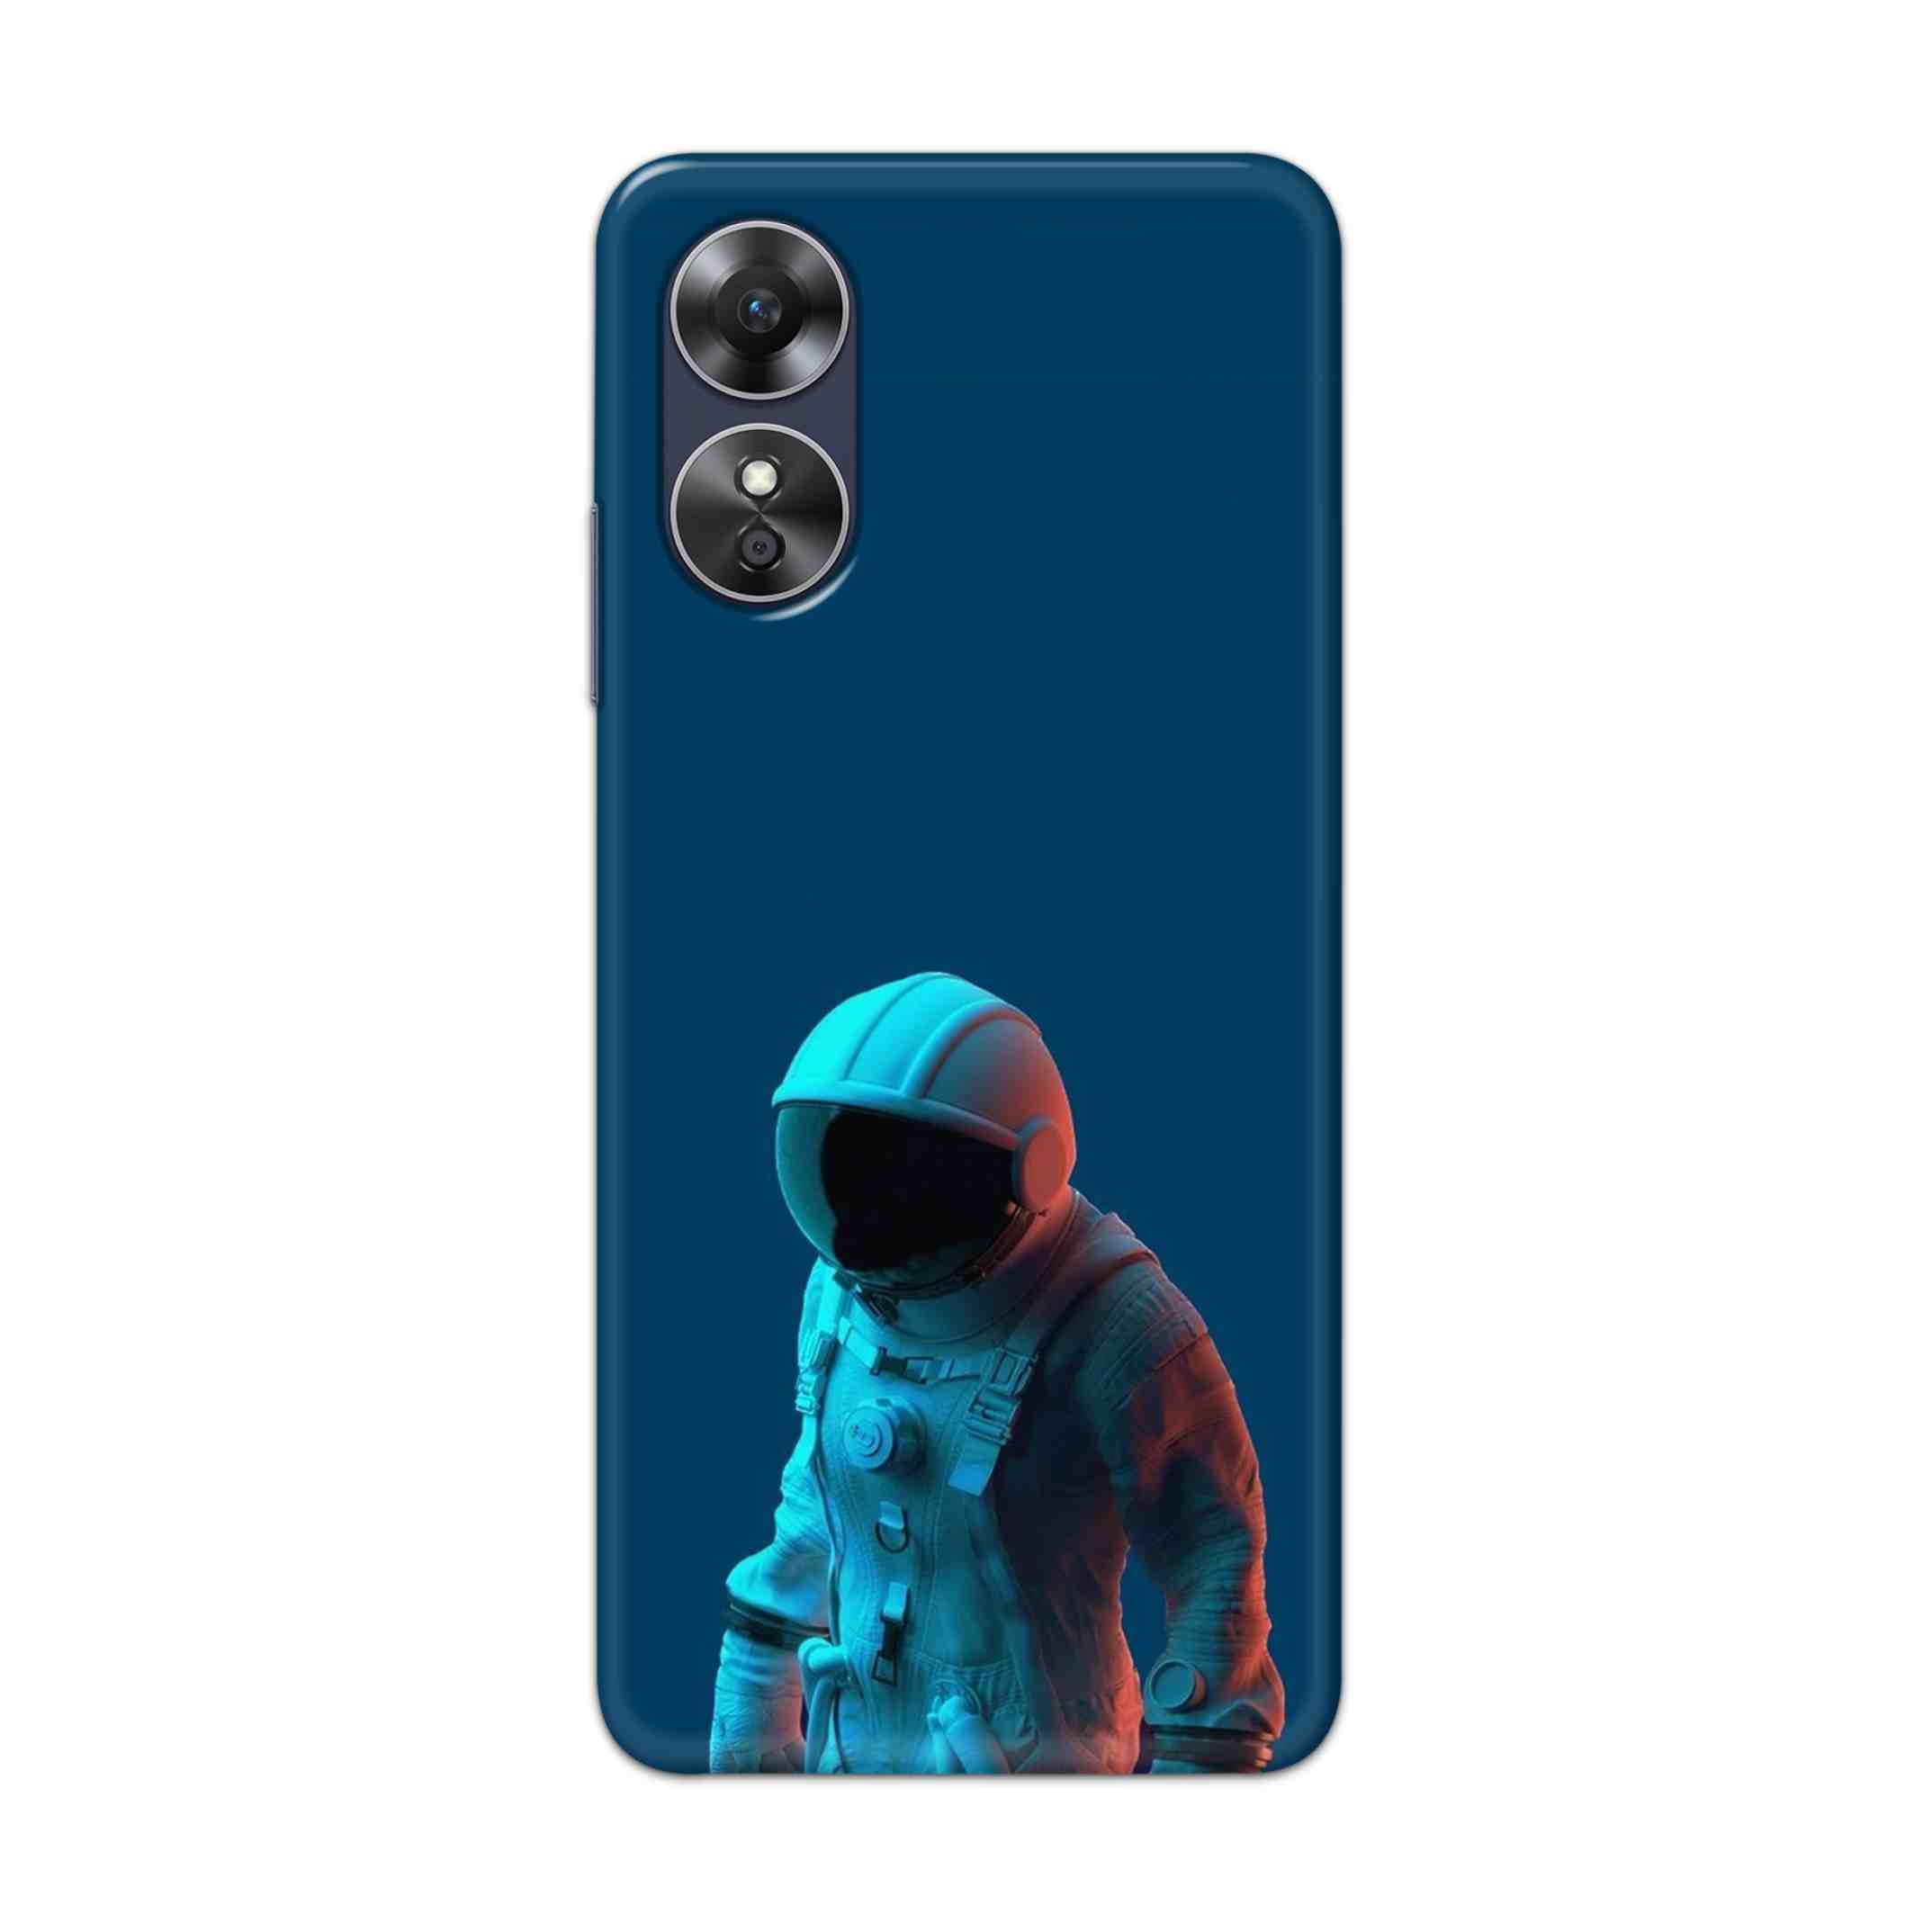 Buy Blue Astronaut Hard Back Mobile Phone Case Cover For Oppo A17 Online